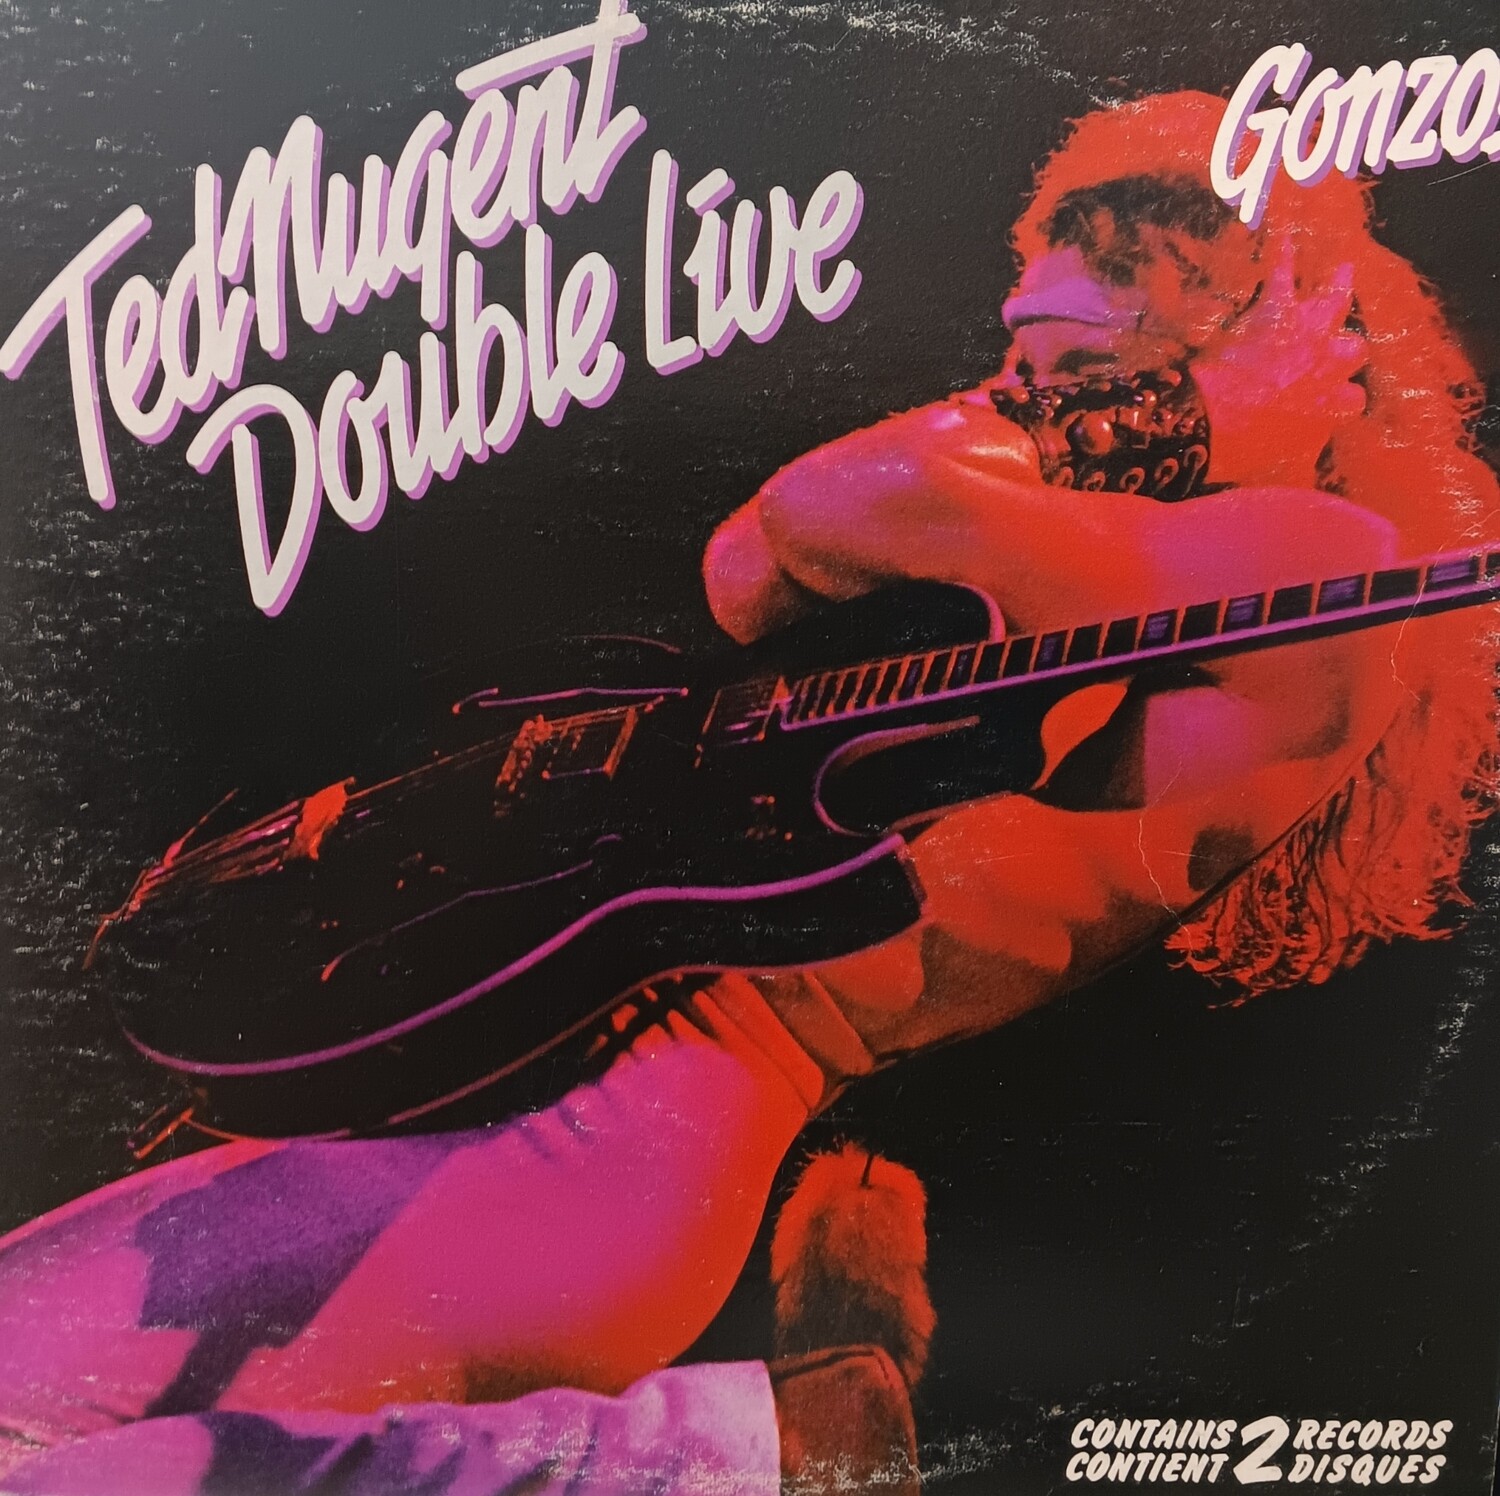 TED NUGENT - Double live gonzo